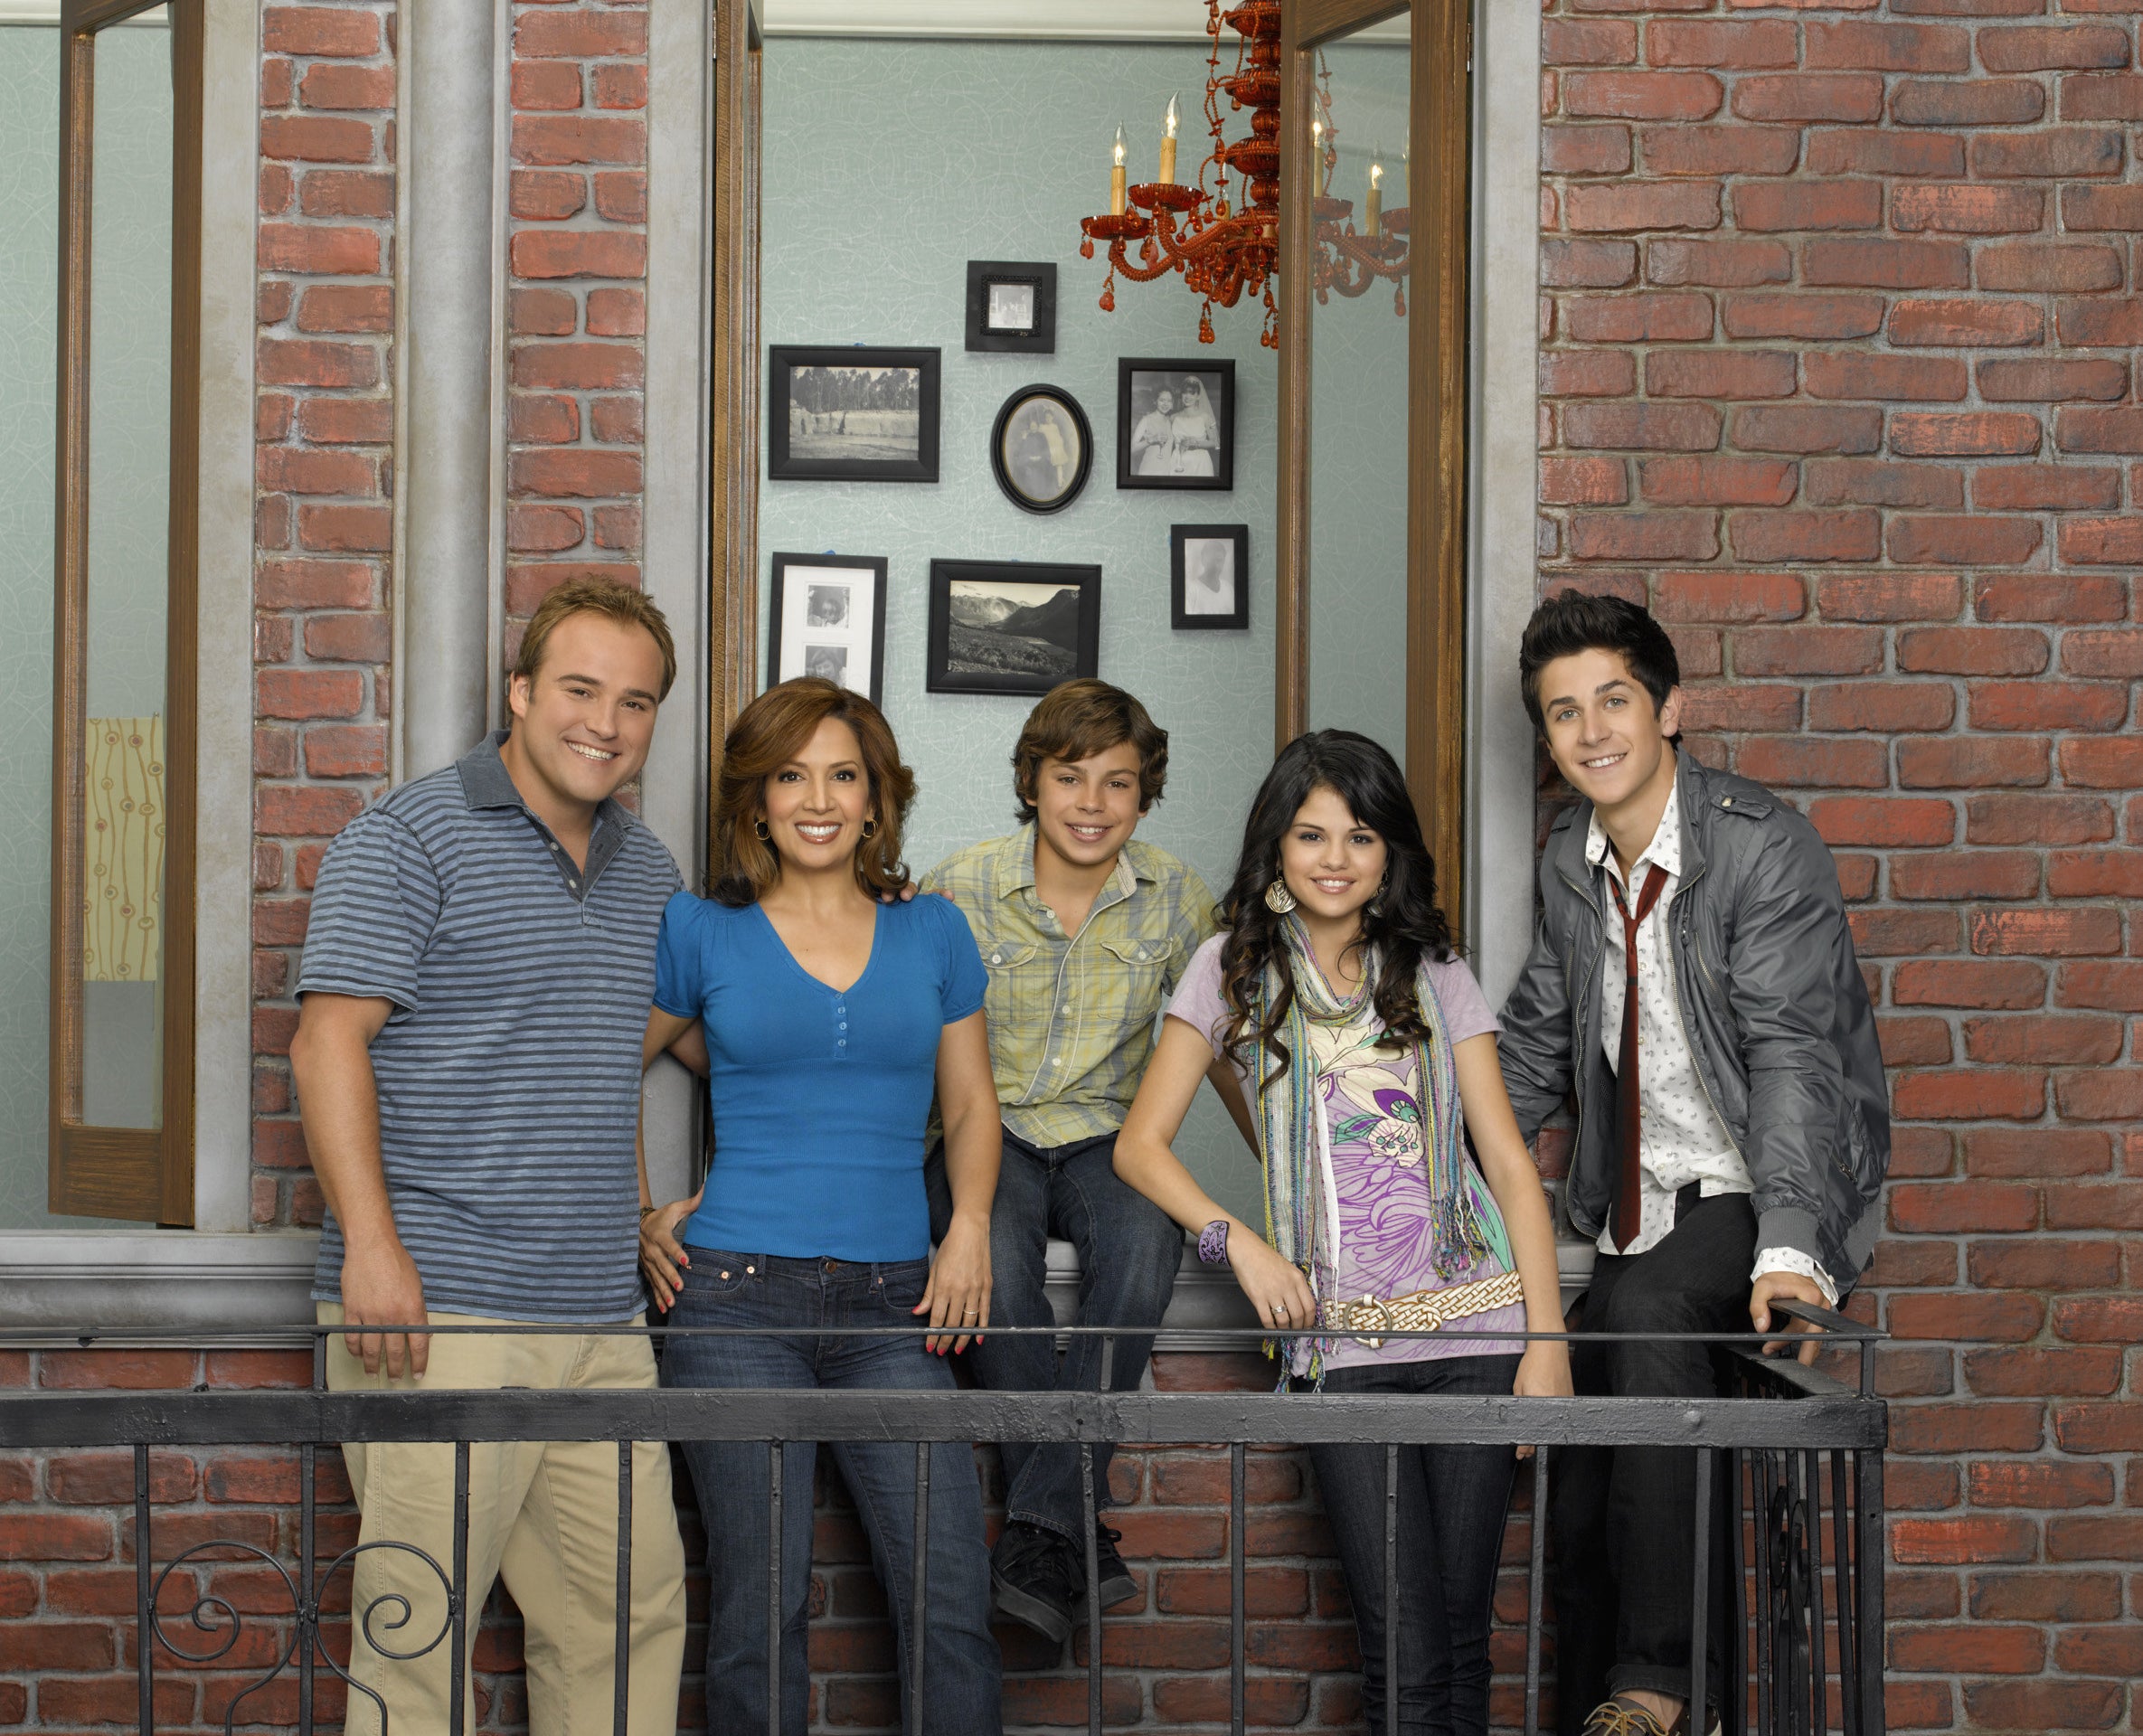 The cast of Wizards of Waverly Place stand on a fire escape